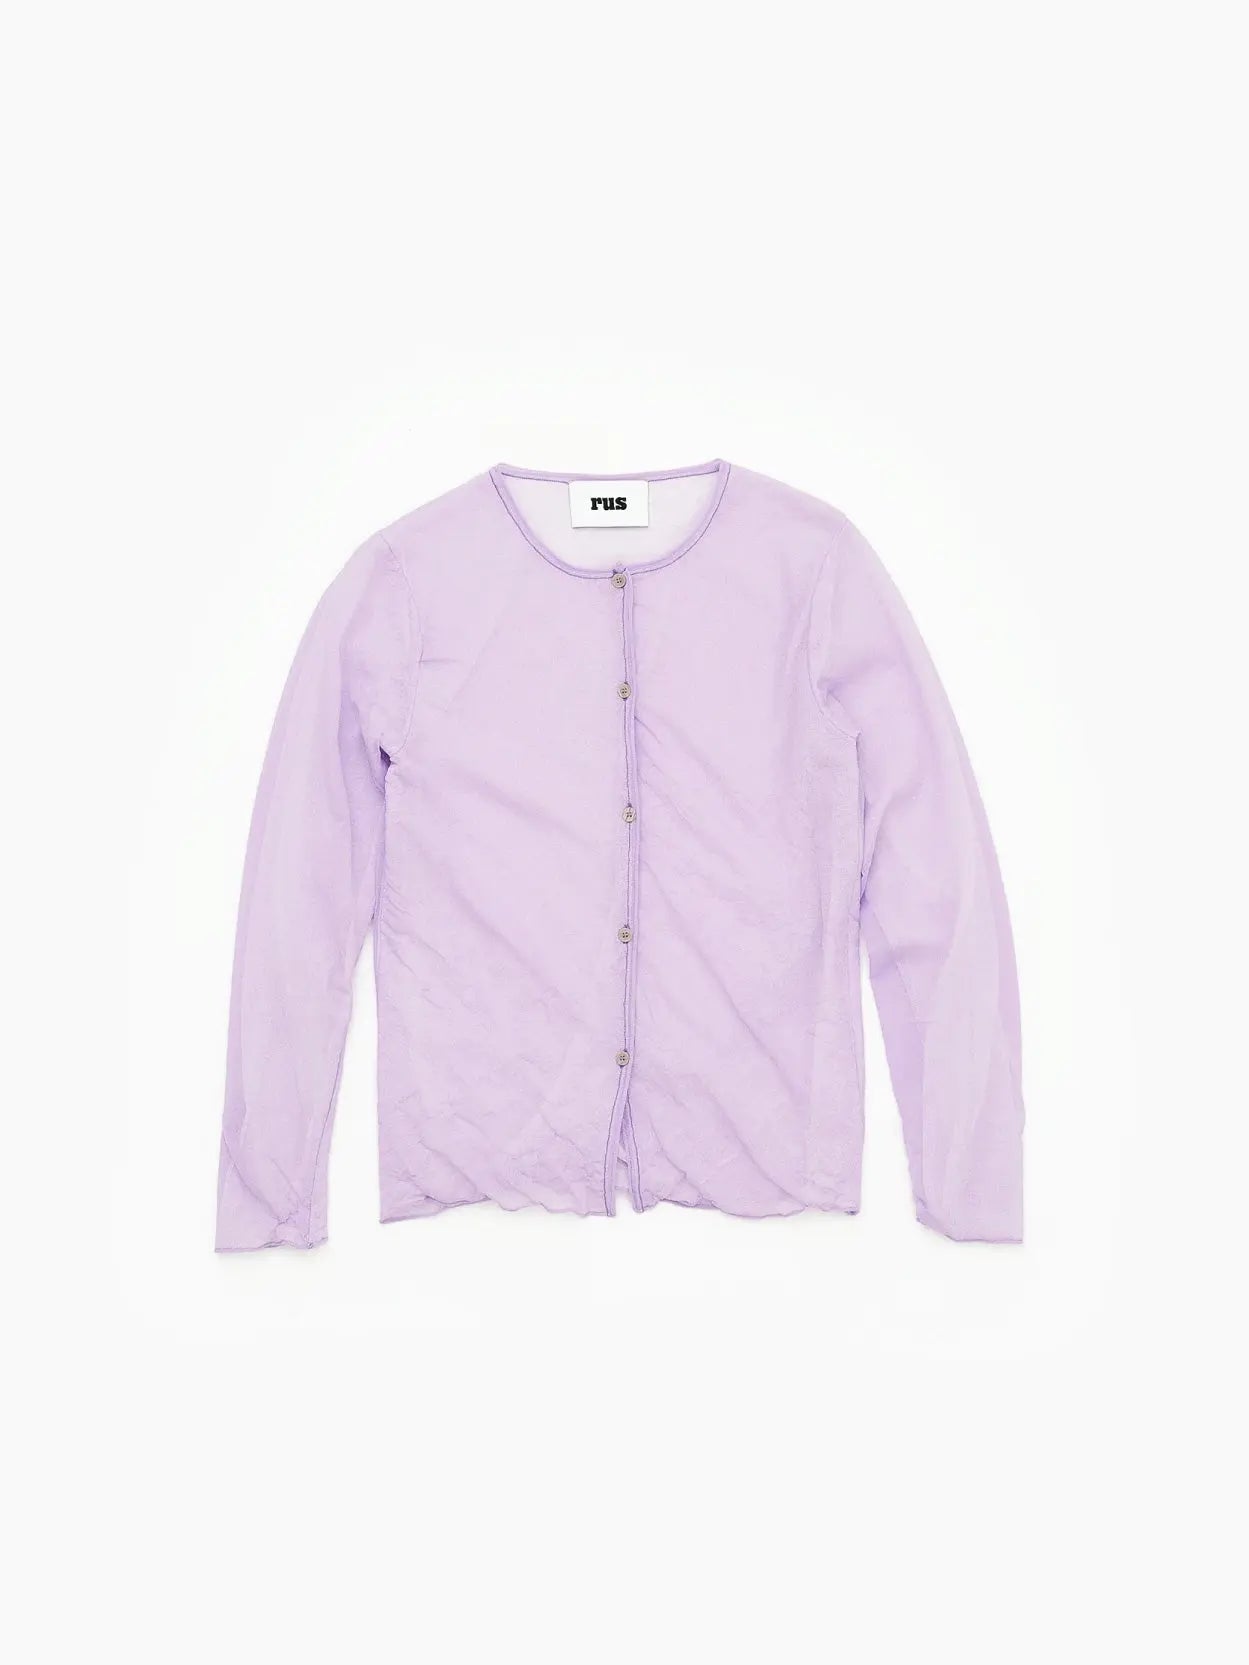 A light purple, long-sleeved button-up shirt with a round neckline is laid flat on a white background. The Garasu Cardigan Mauve, by the brand "Rus," available at BassalStore in Barcelona, has a simple and minimalistic design.